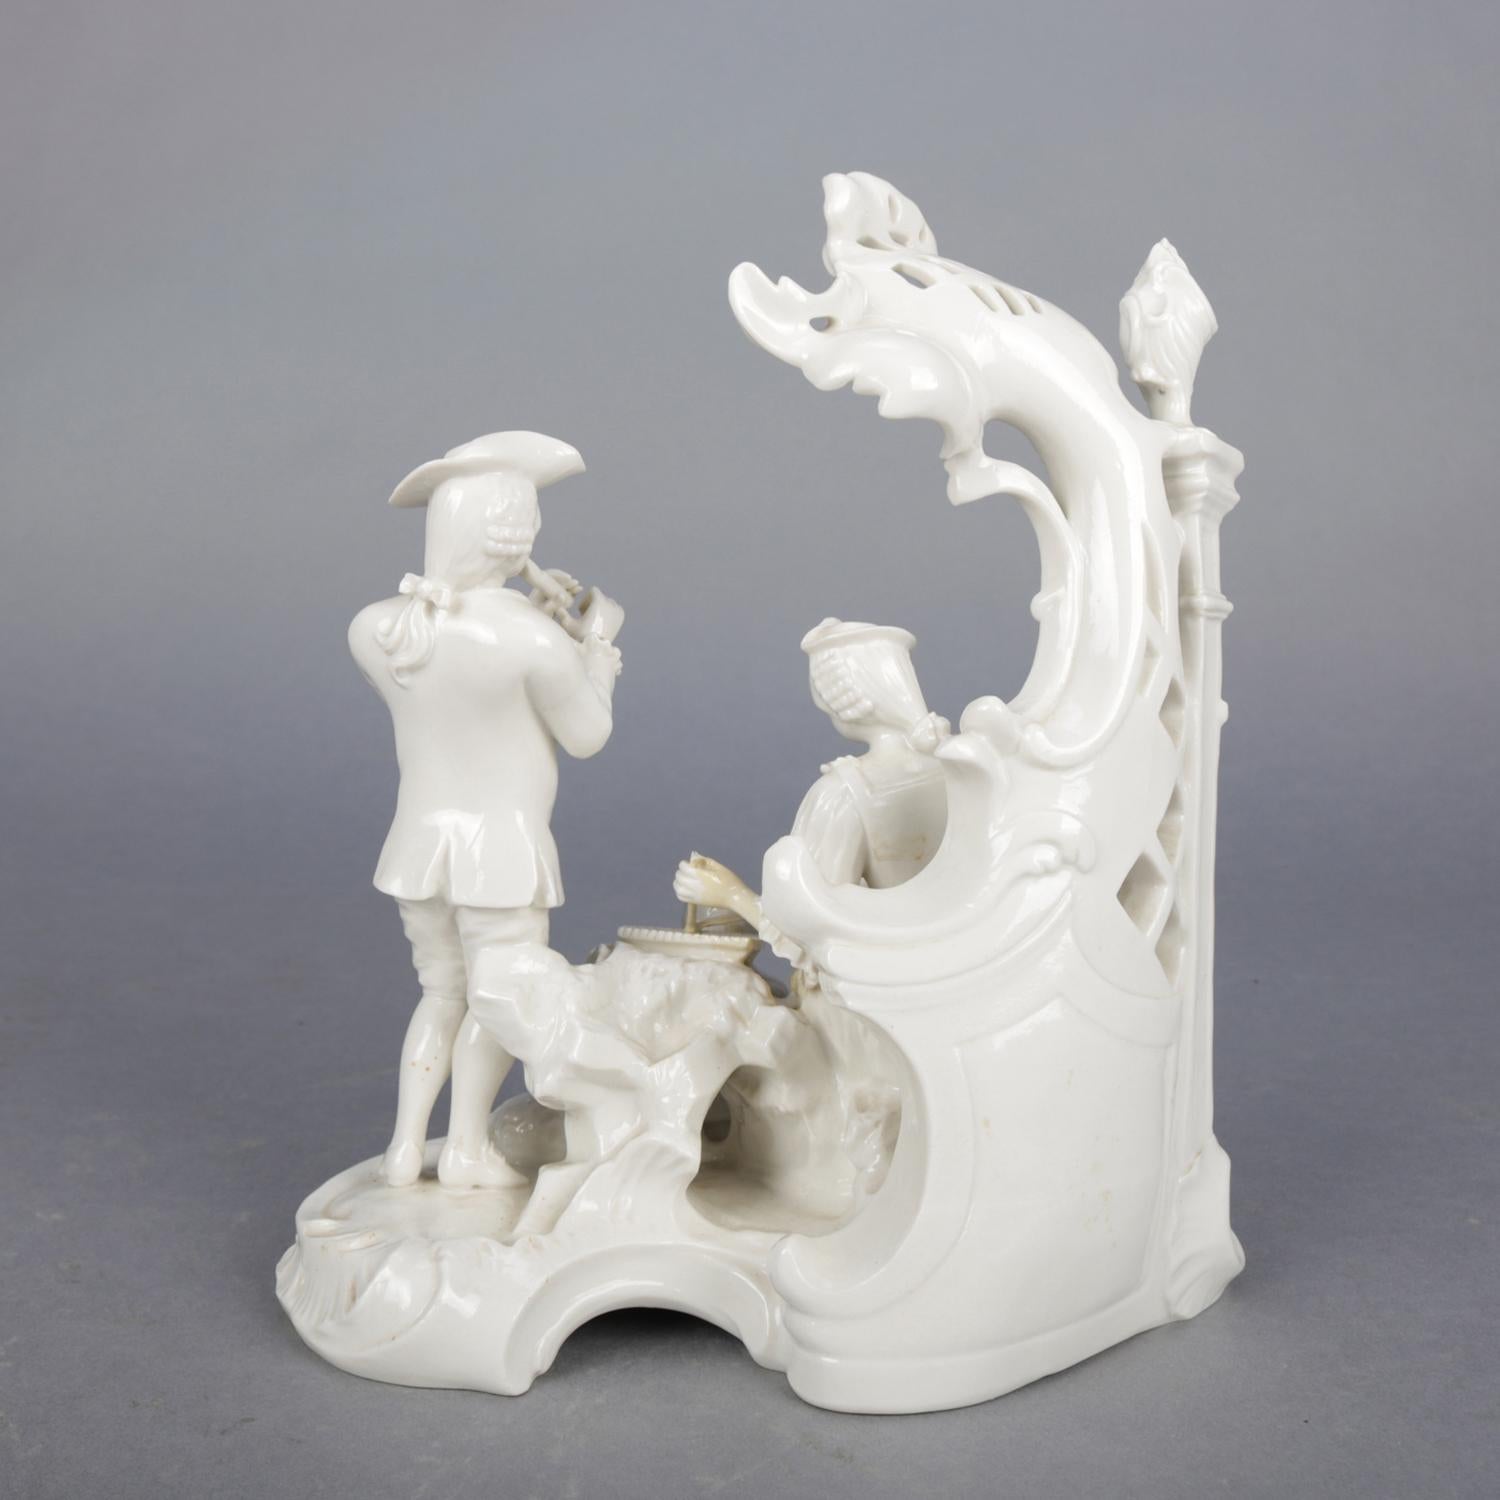 Glazed Antique German Figural Blanc de Chine Family Grouping, Parlor Music Scene